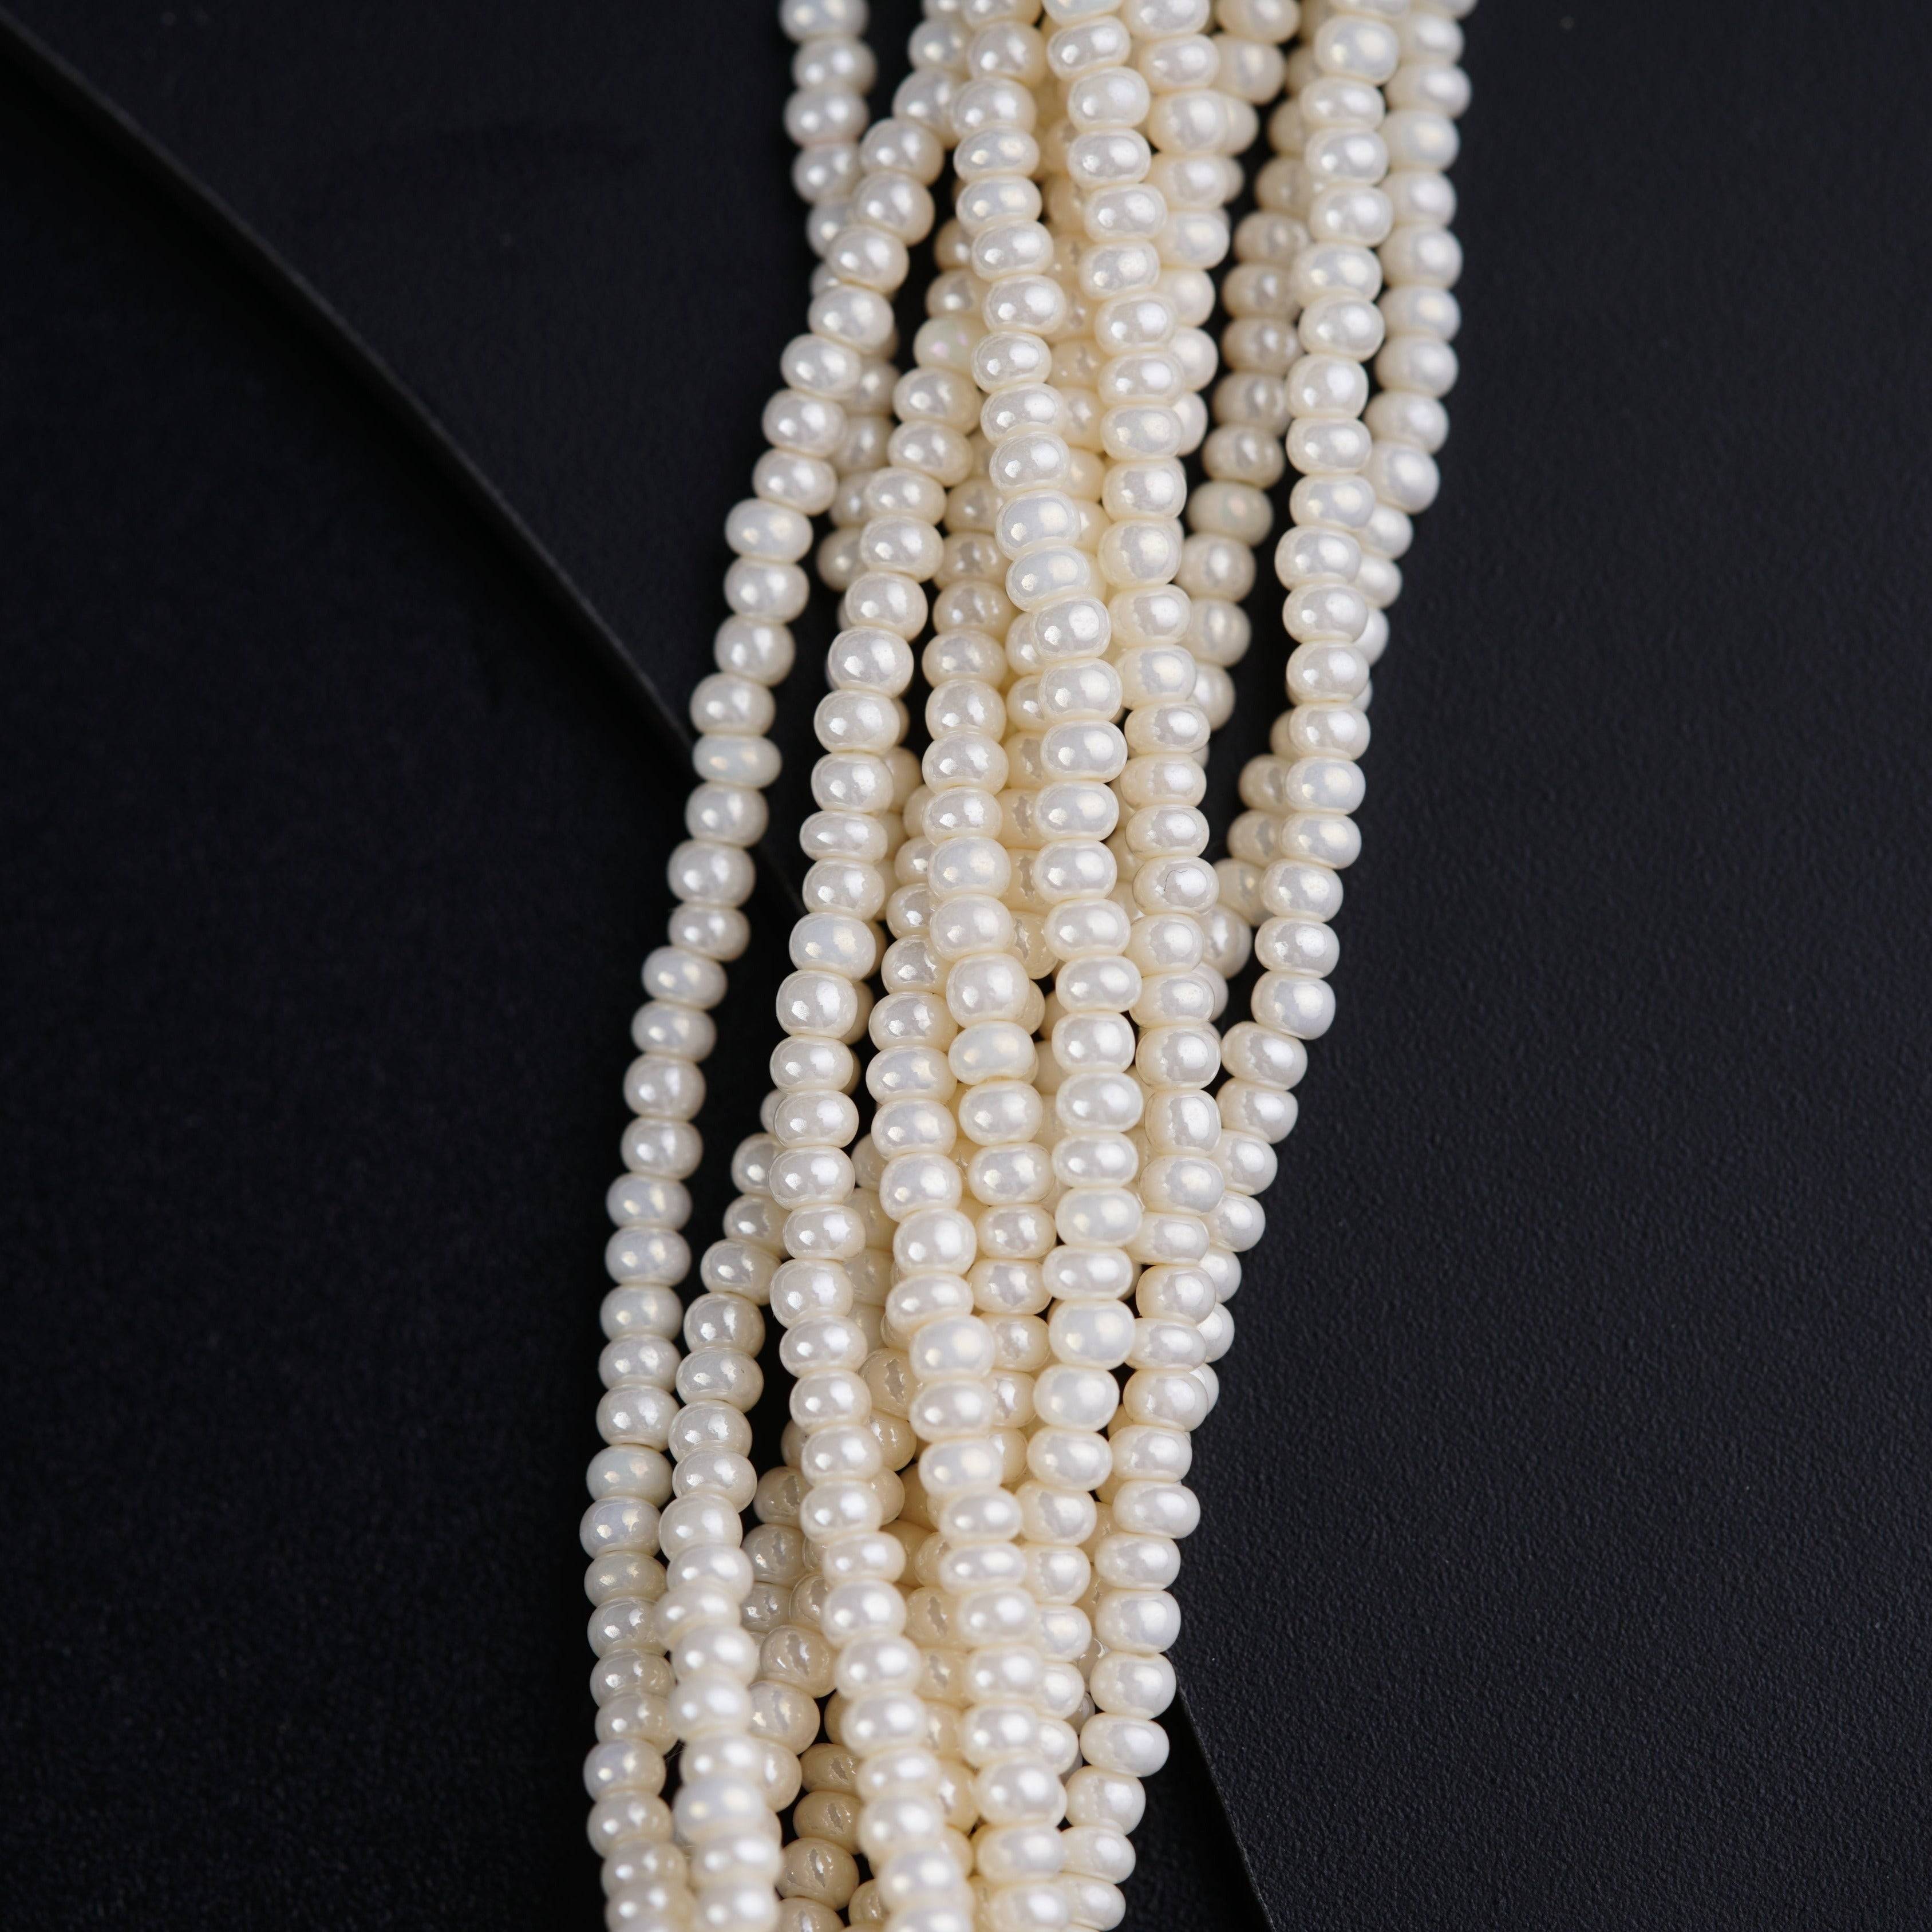 a close up of a bunch of pearls